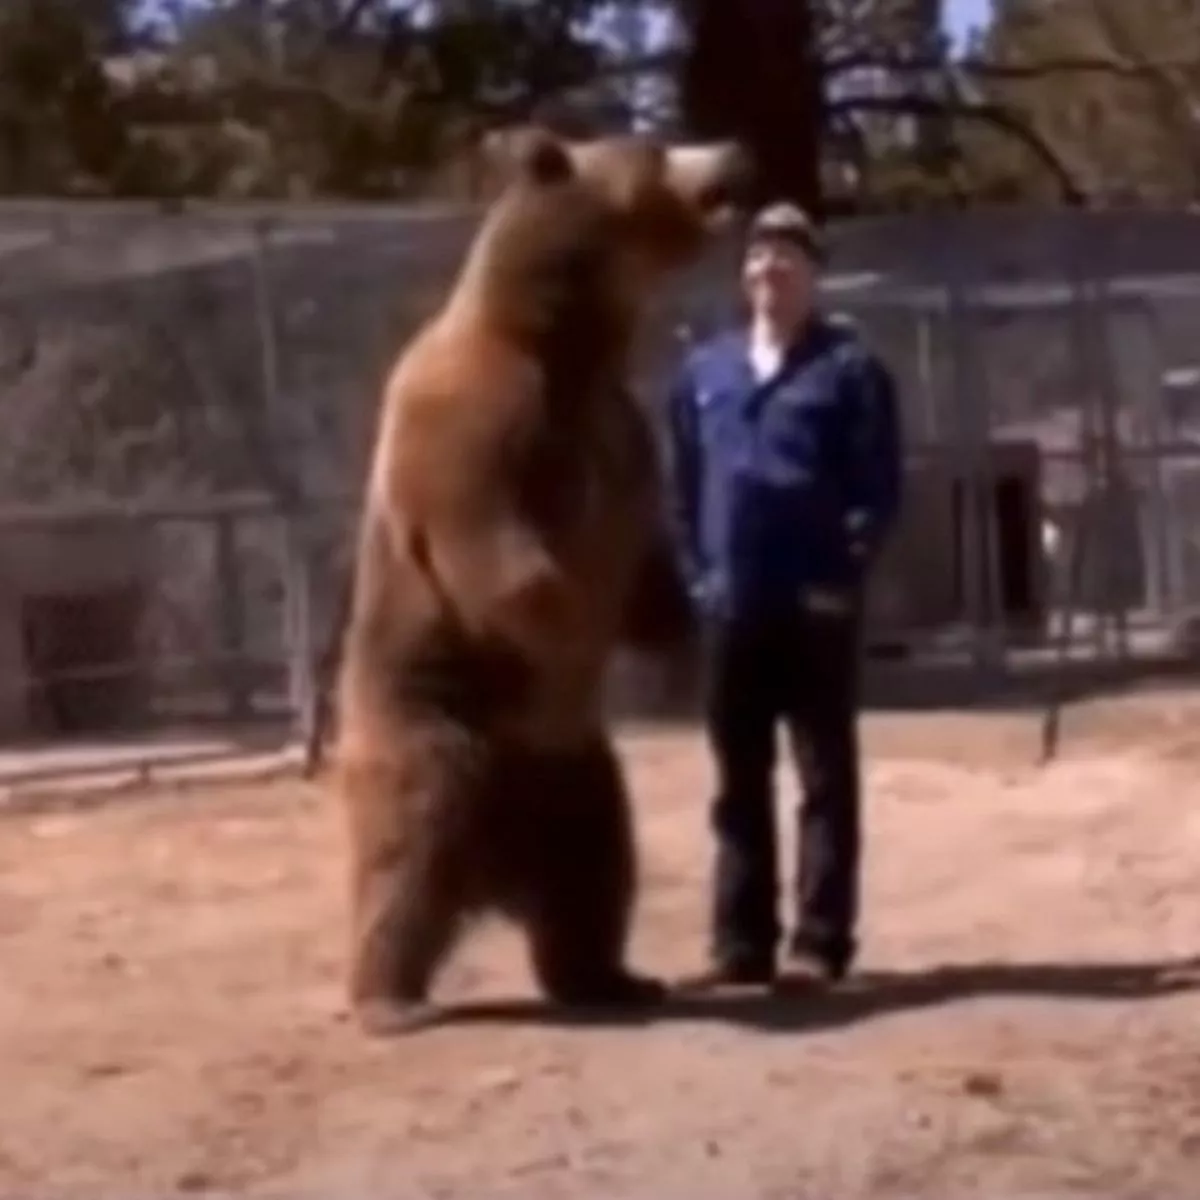 2_Horrifying-moment-bear-mauls-trainer-to-death-after-simple-routine-goes-wrong.jpg